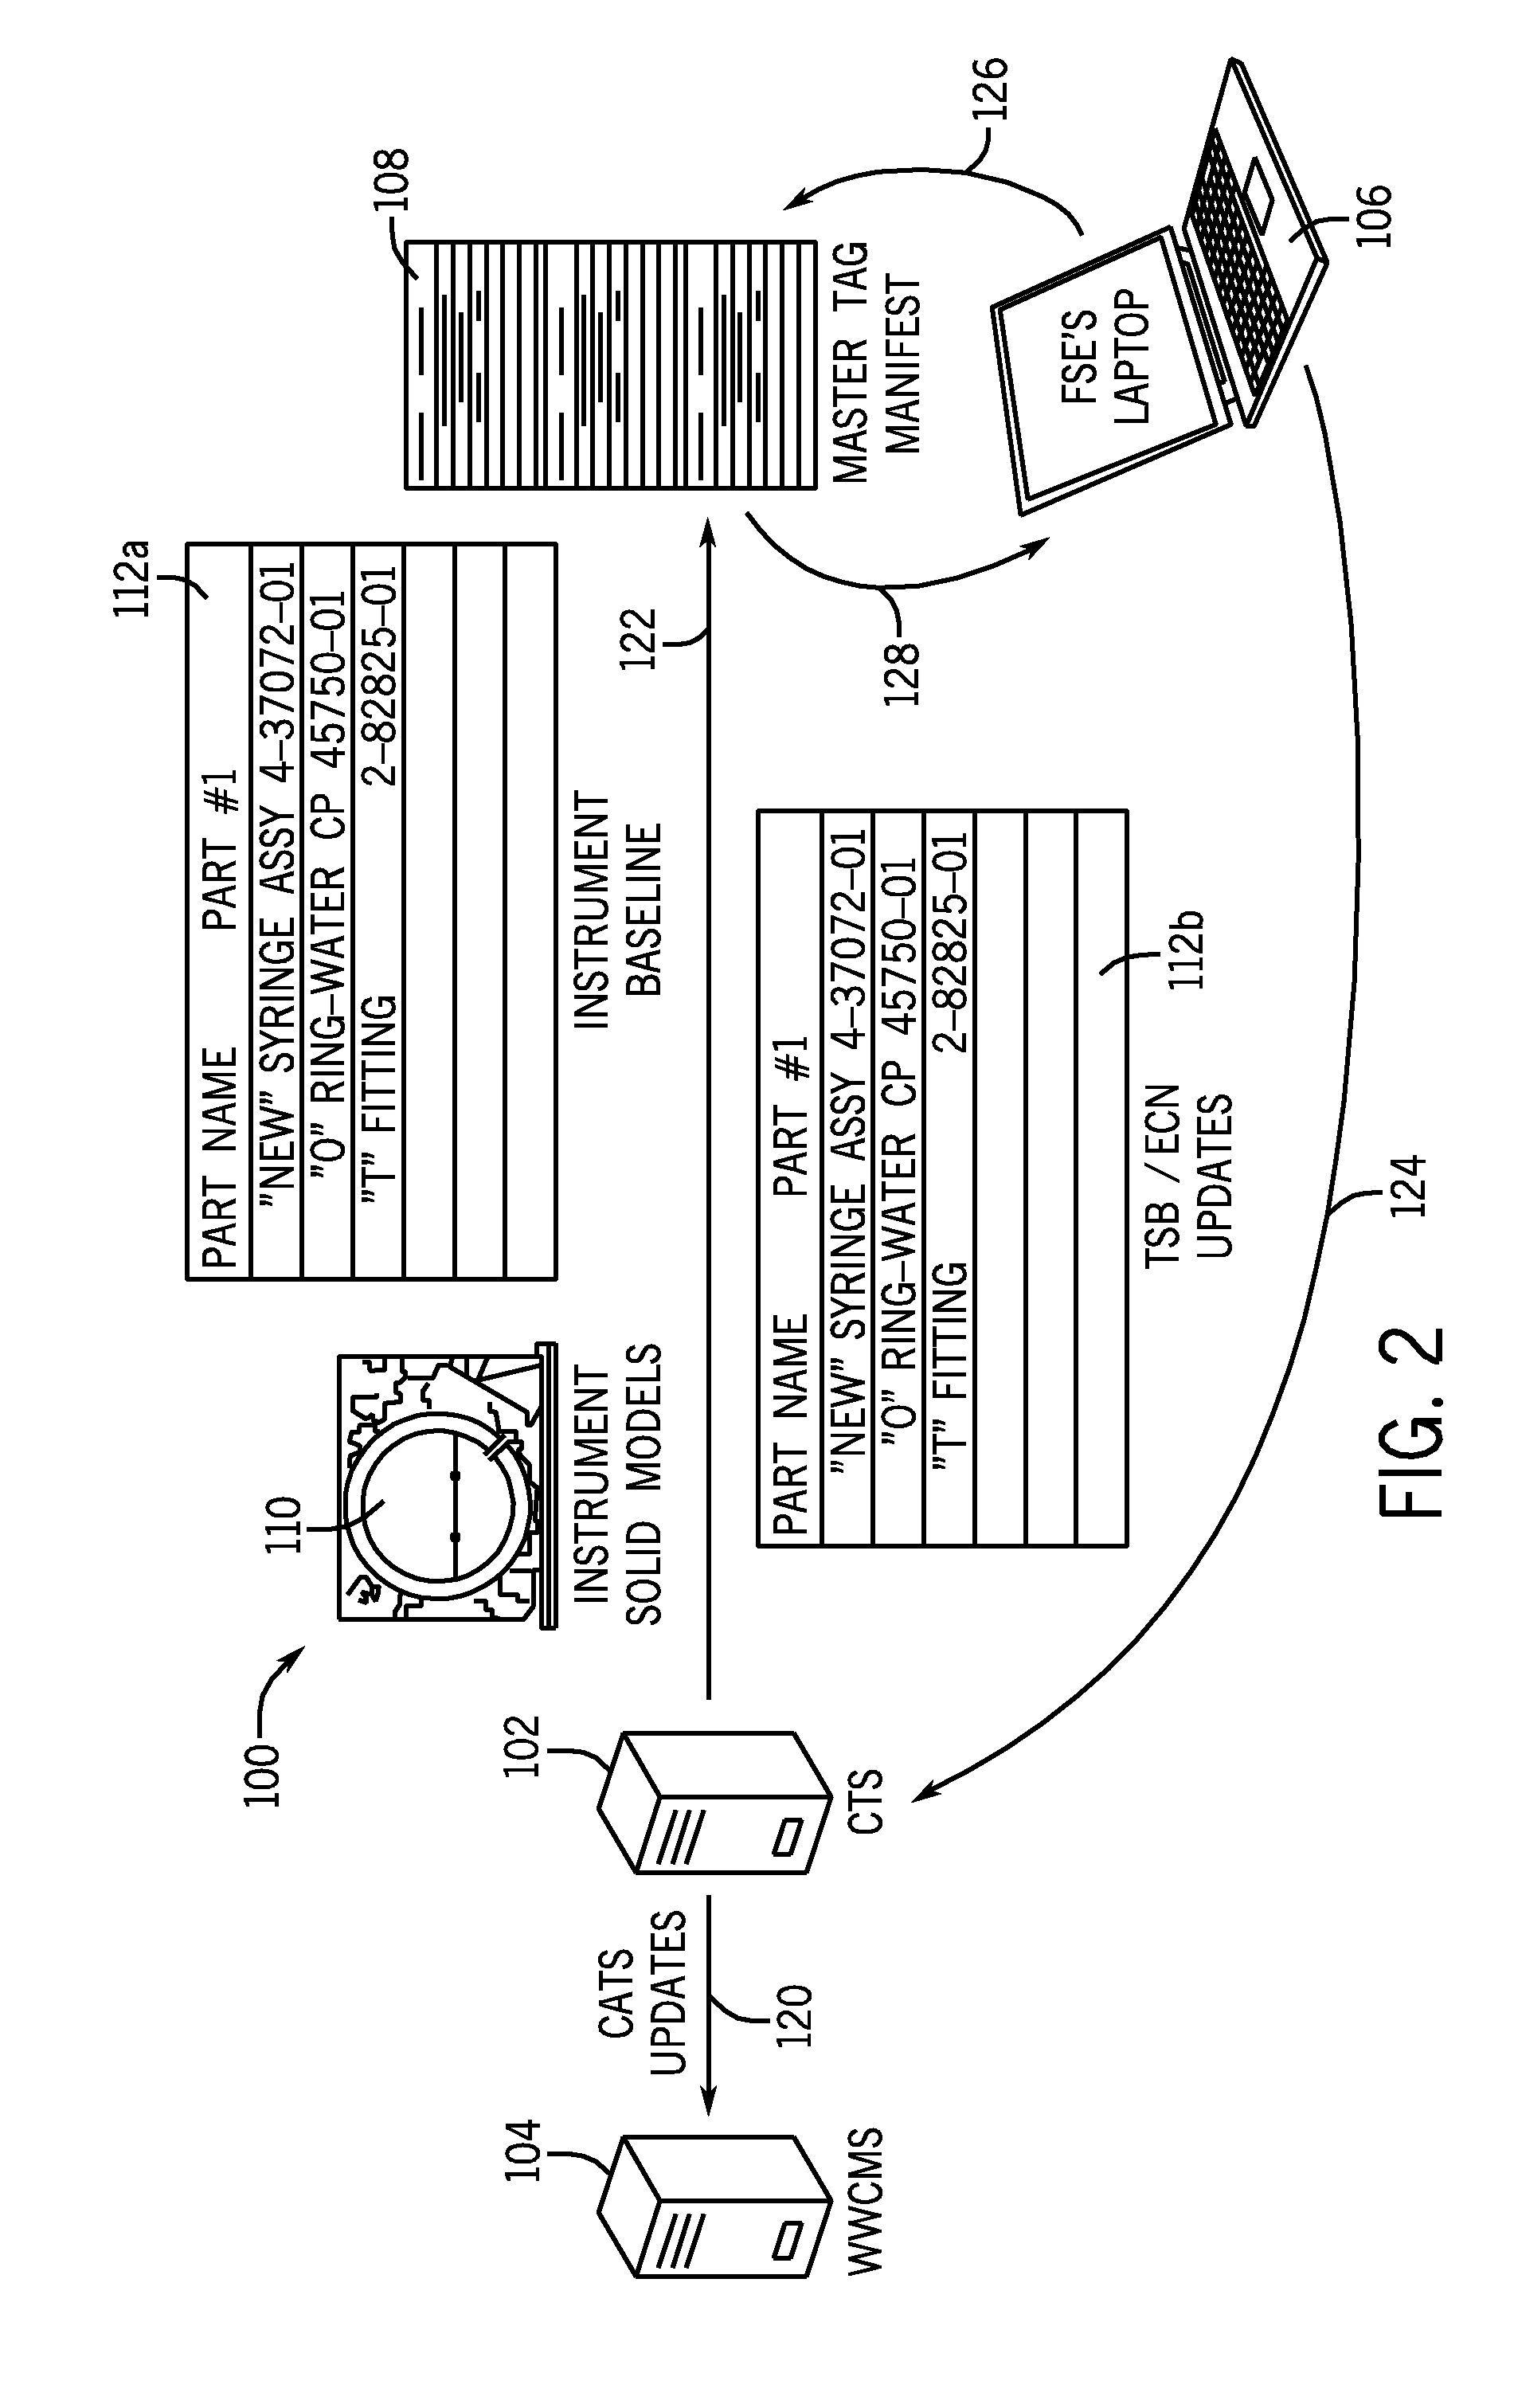 System for tracking the location of components, assemblies, and sub-assemblies in a medical instrument